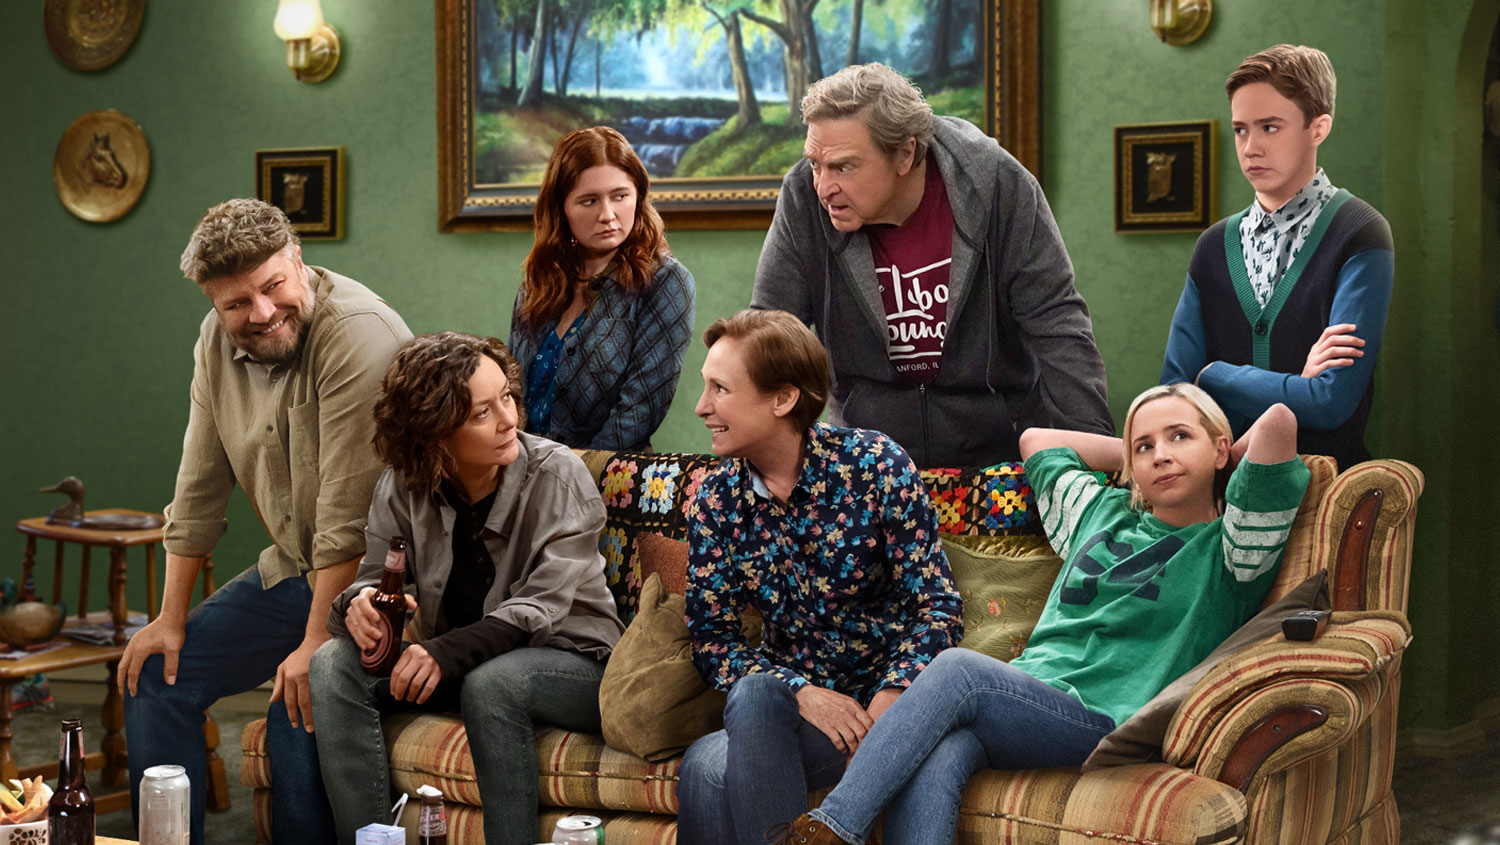 The Conners: Driving, Dating and Deceit (8/30) (Rebroadcast. OAD: 10/5/22)